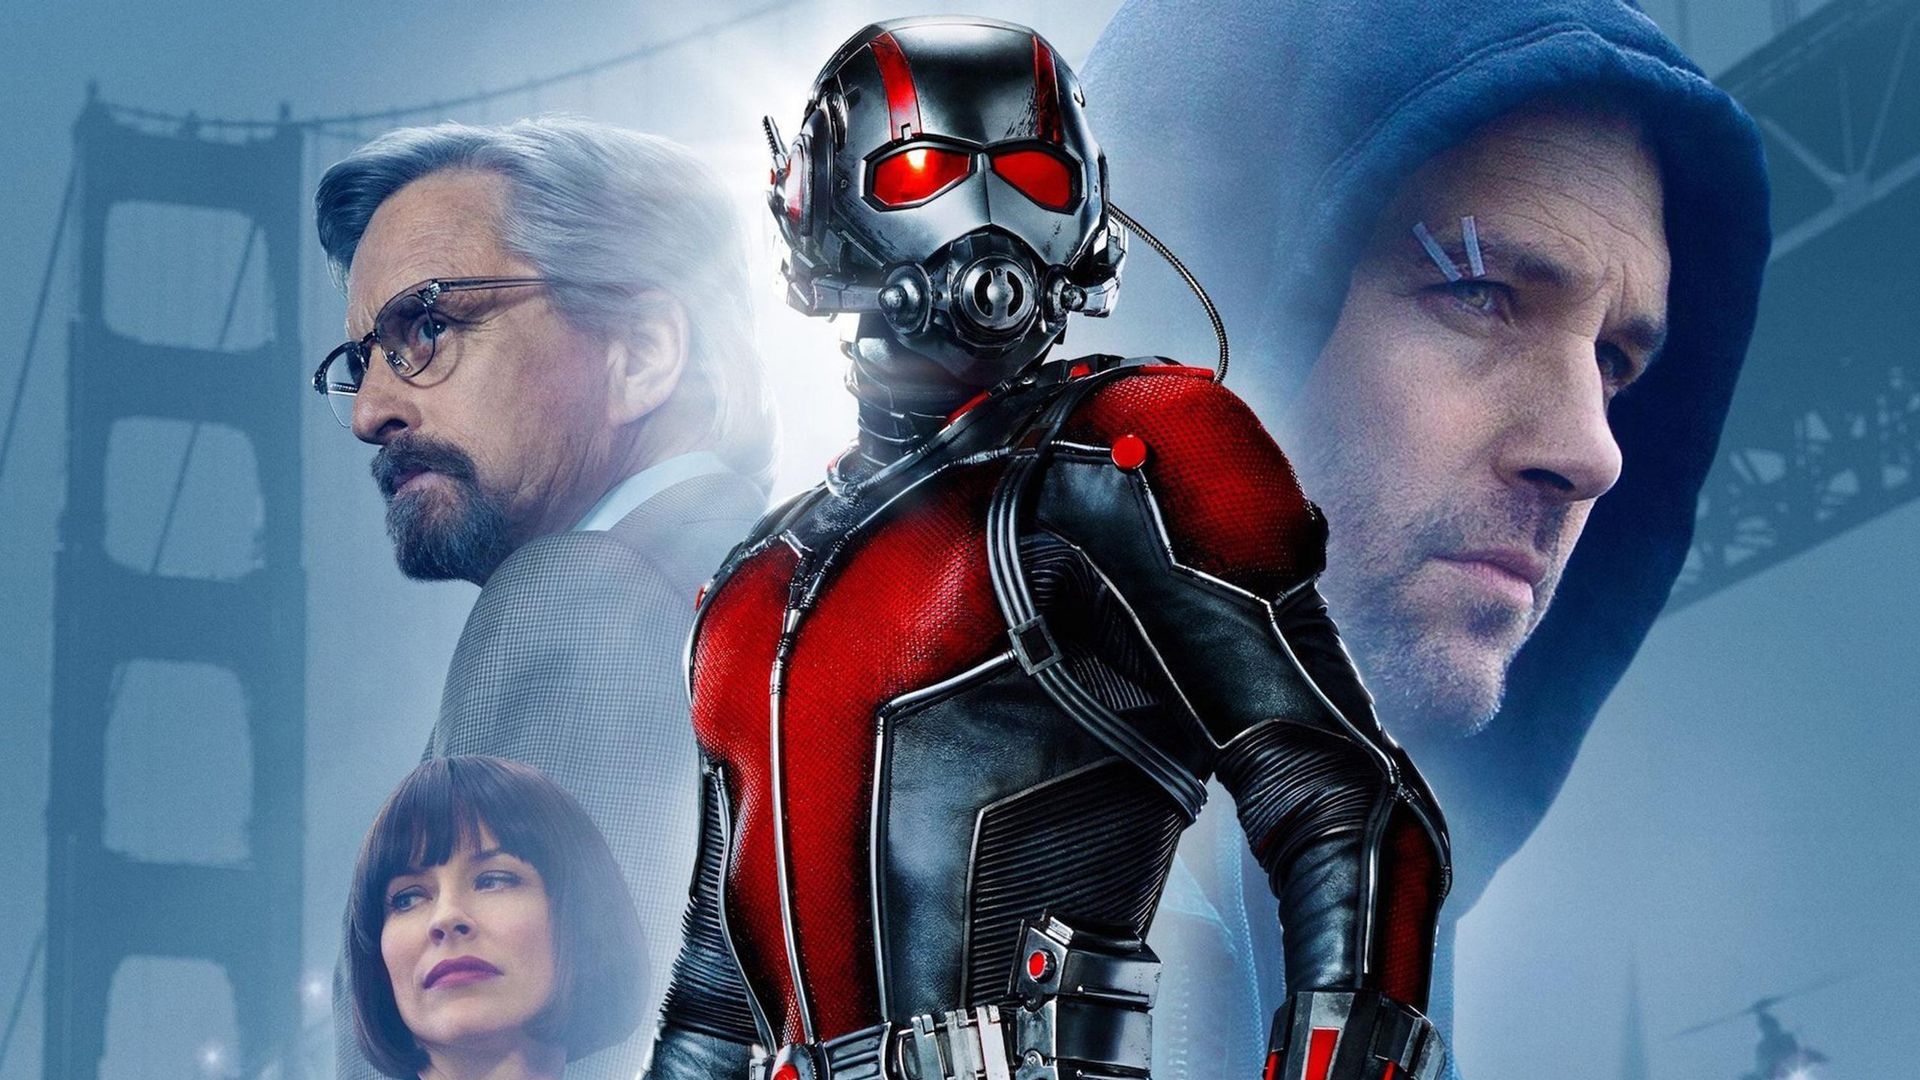 With AntMan, Marvel introduced its smallest hero with the biggest